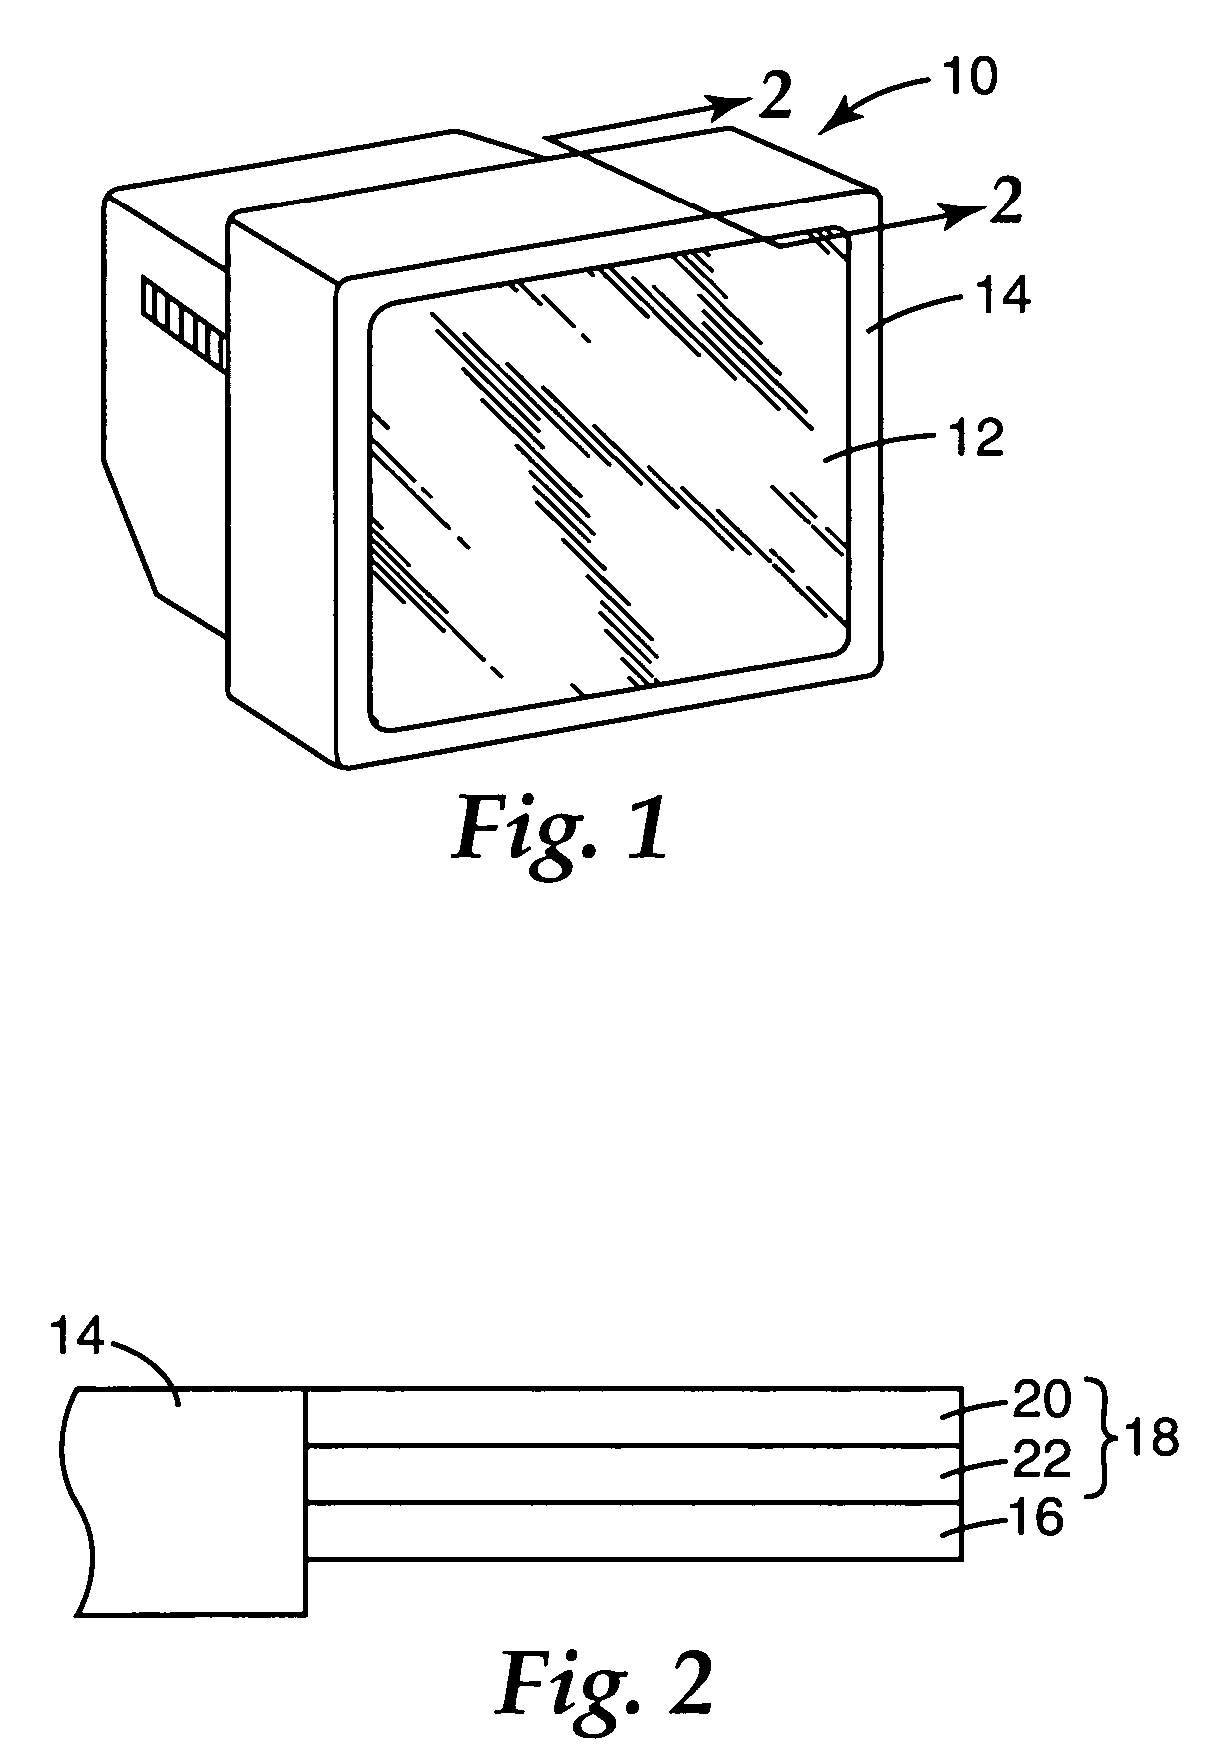 Low refractive index fluoropolymer coating compositions for use in antireflective polymer films